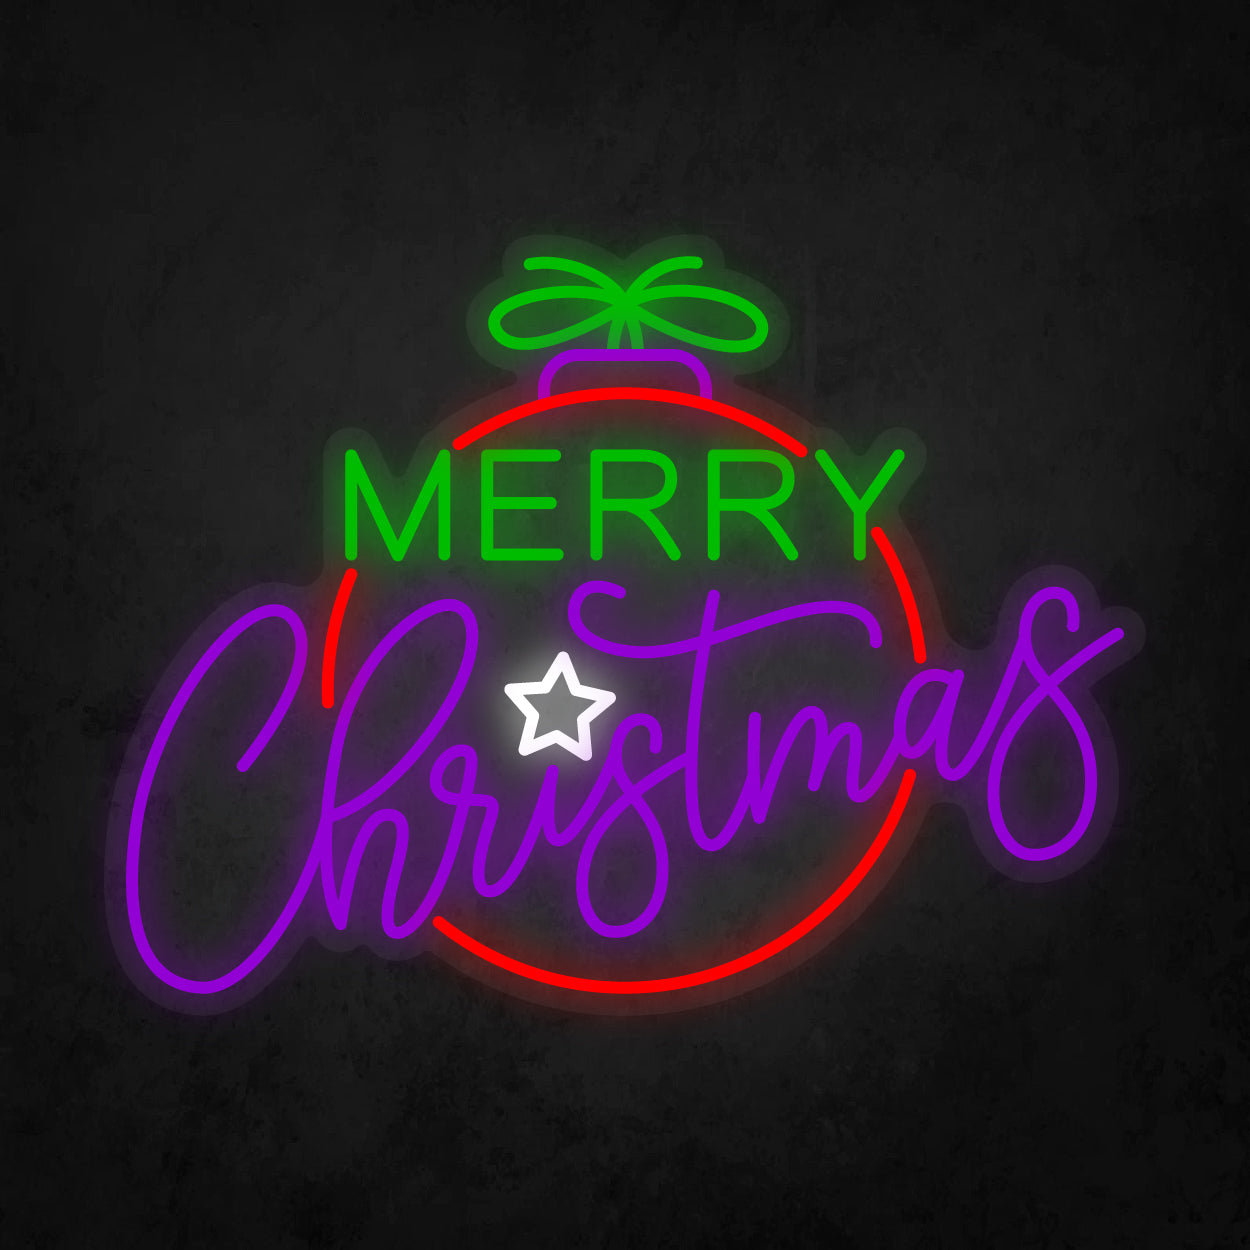 LED Neon Sign - Merry Christmas - Colorful